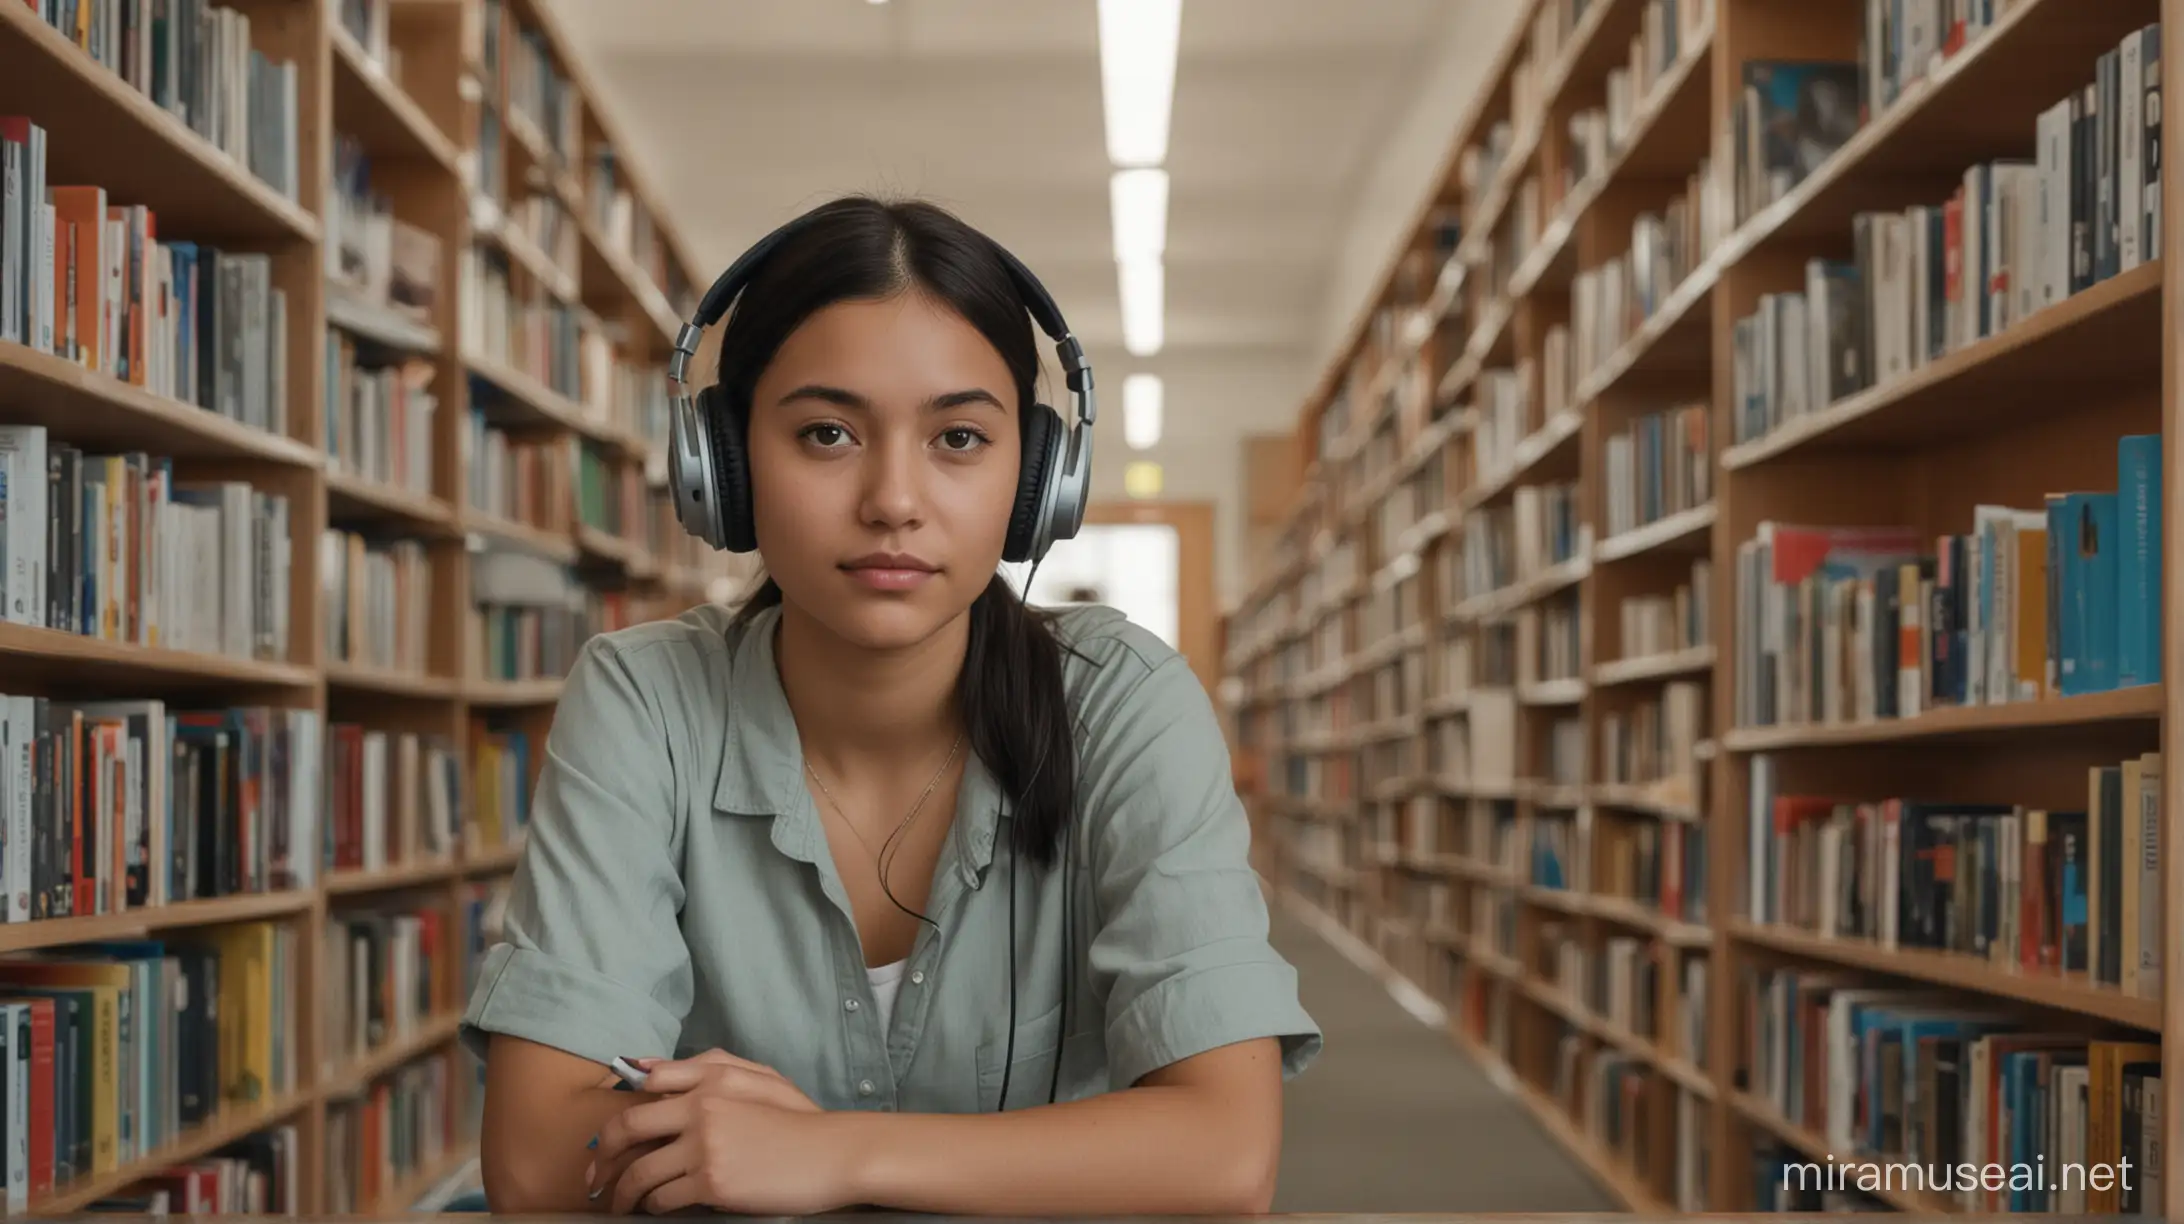 Distraction-Free Zone: Maya sits in a quiet library, headphones on, completely focused on her studies with no distractions around her.